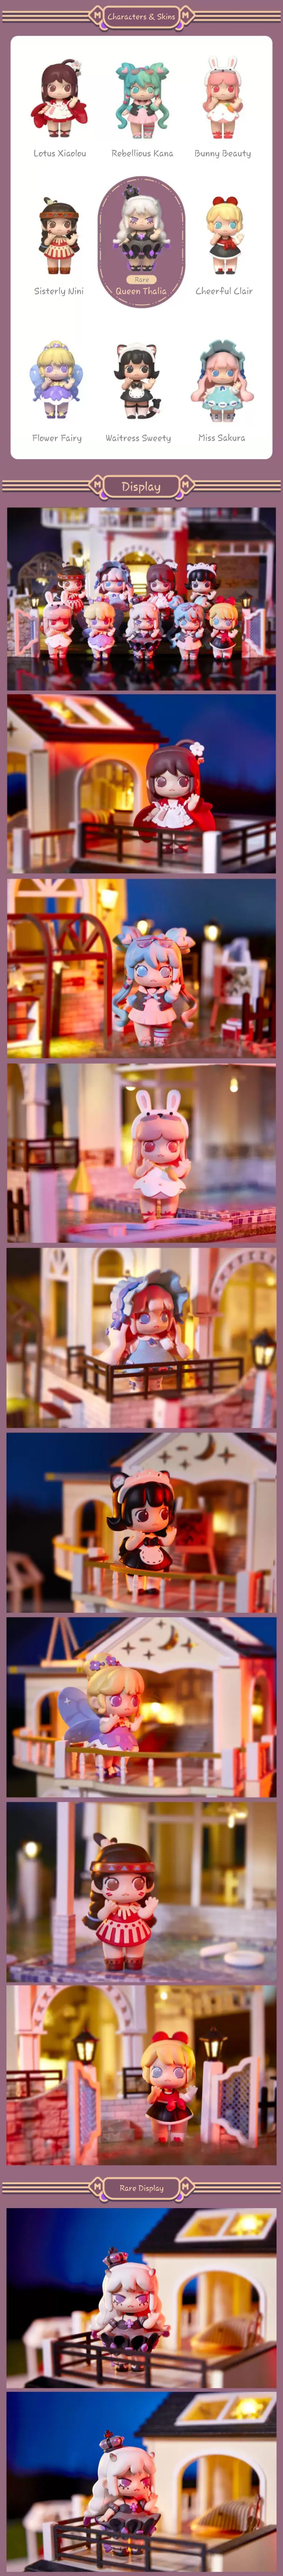 Hello Miniworld Blind Bag Figures Appear on Taobao and